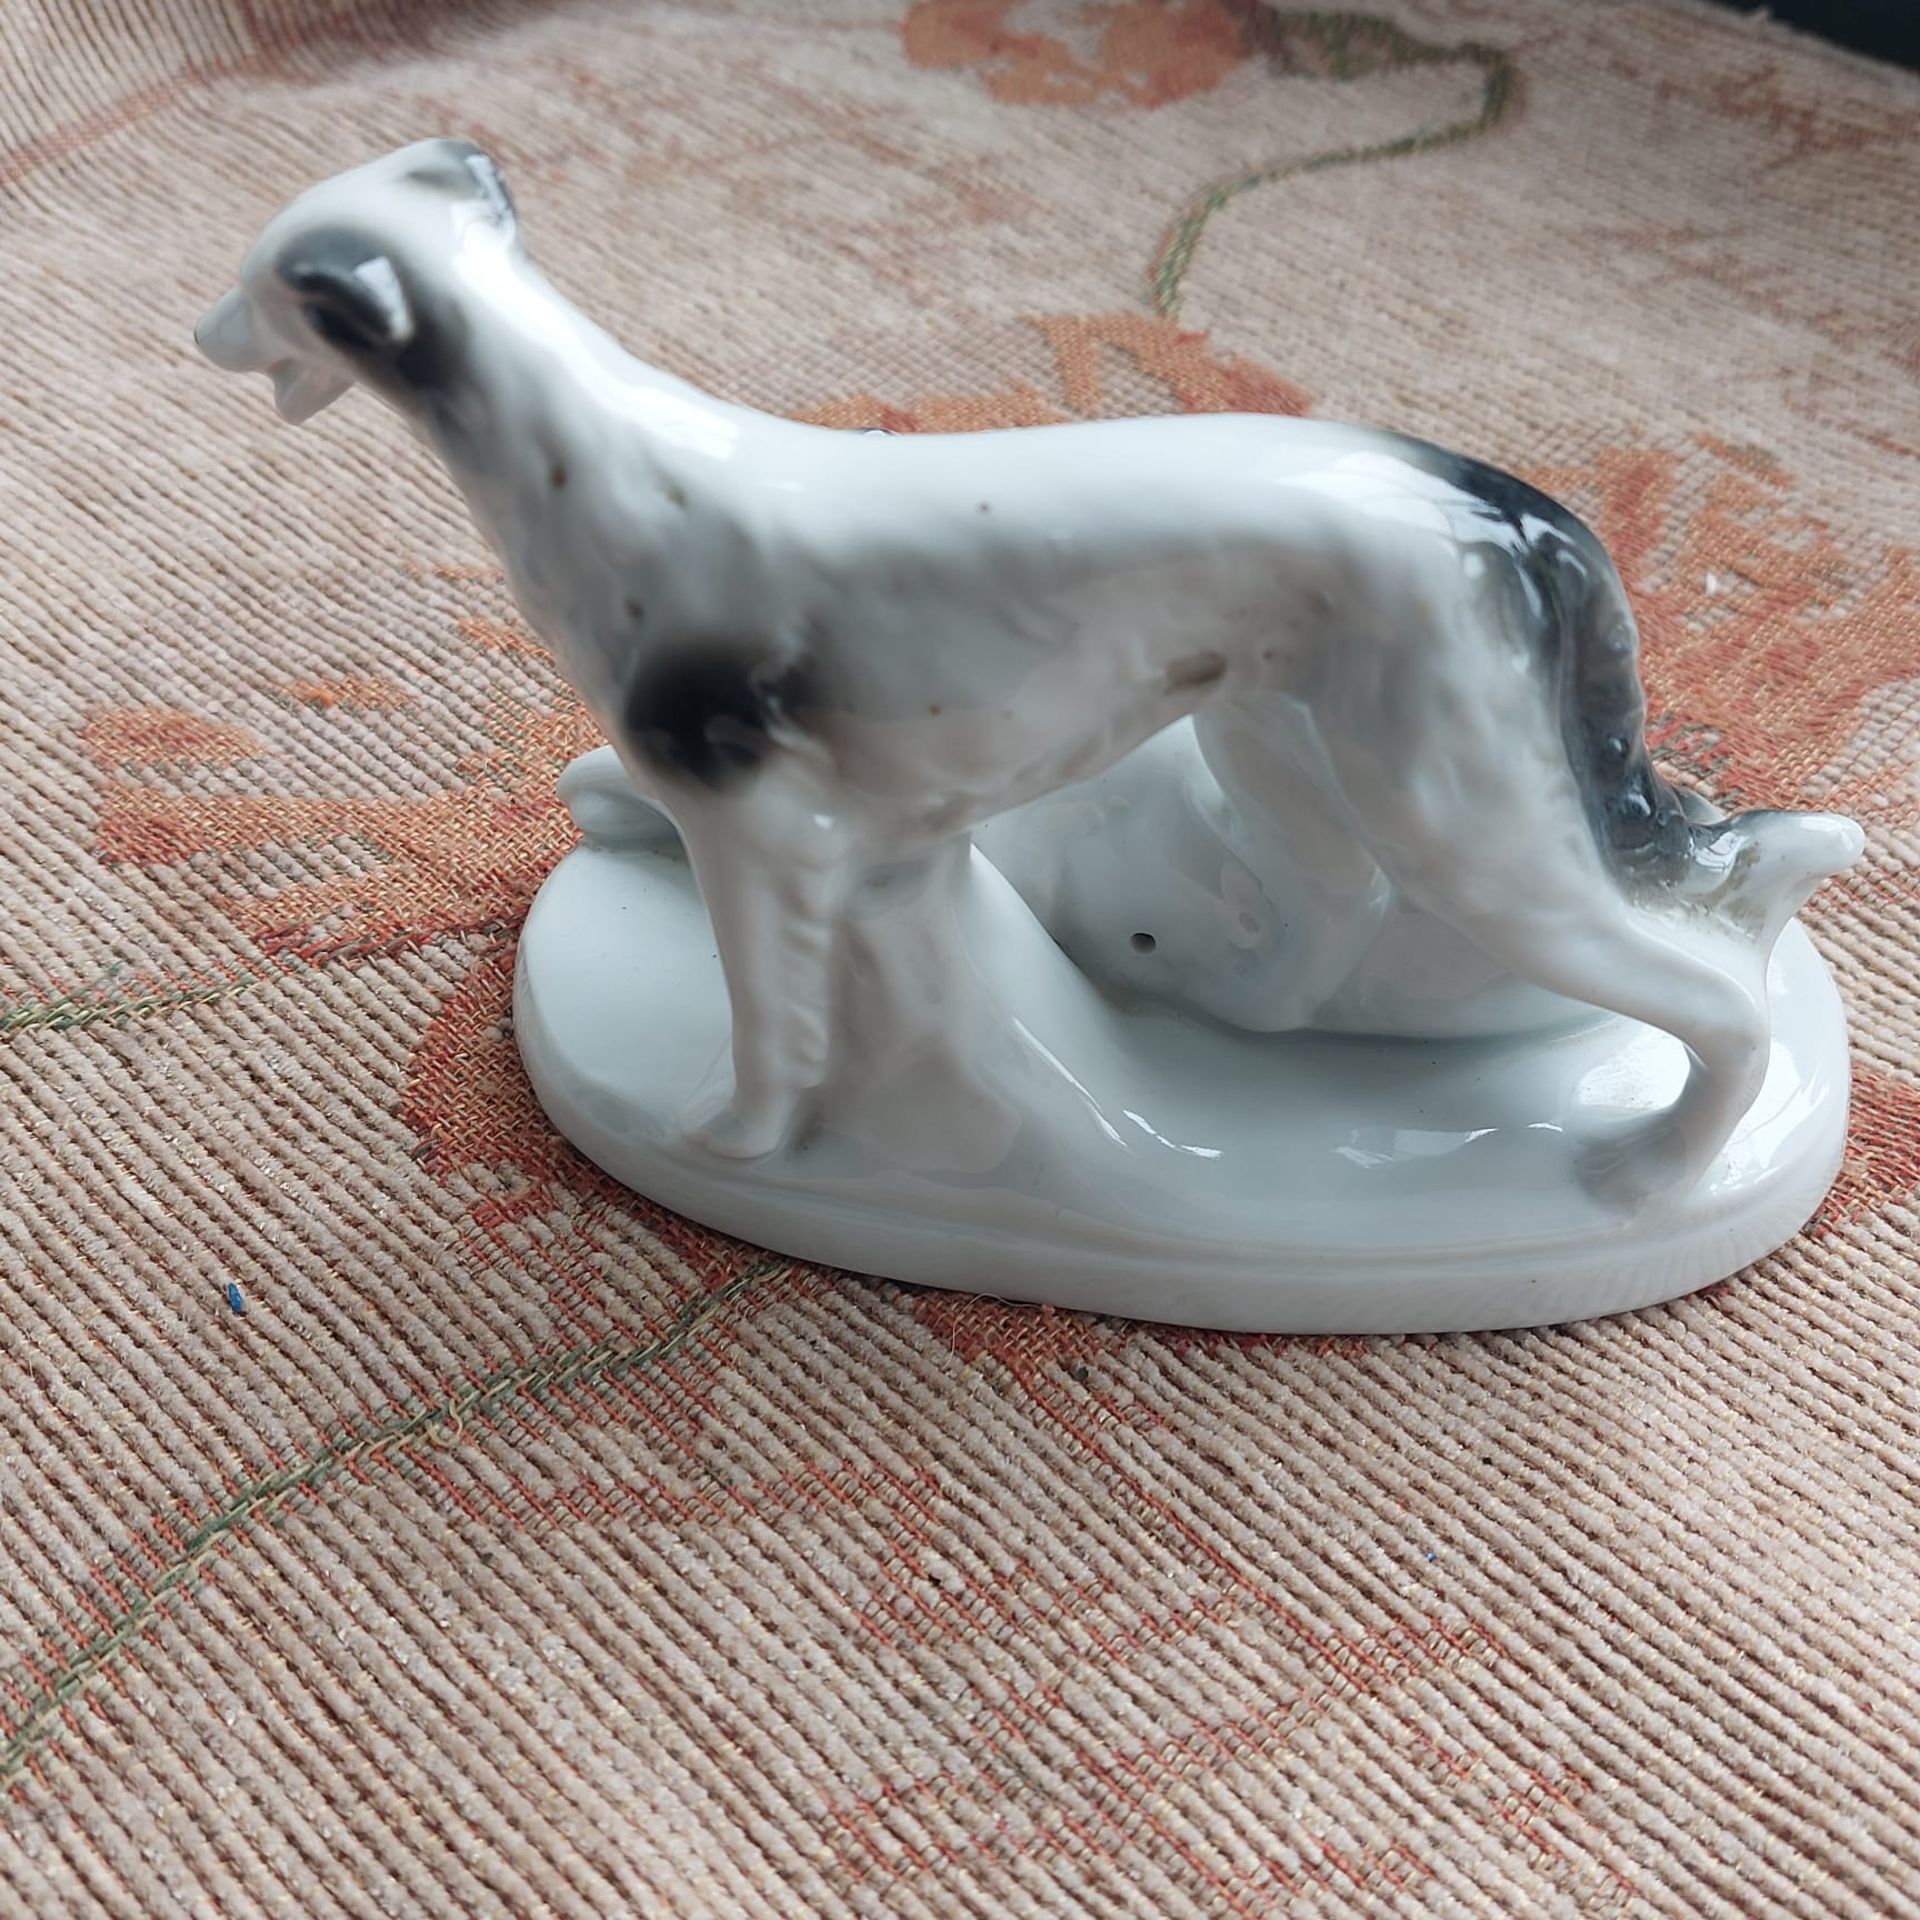 Vintage Borzoi Russian Wolfhounds - Image 2 of 2